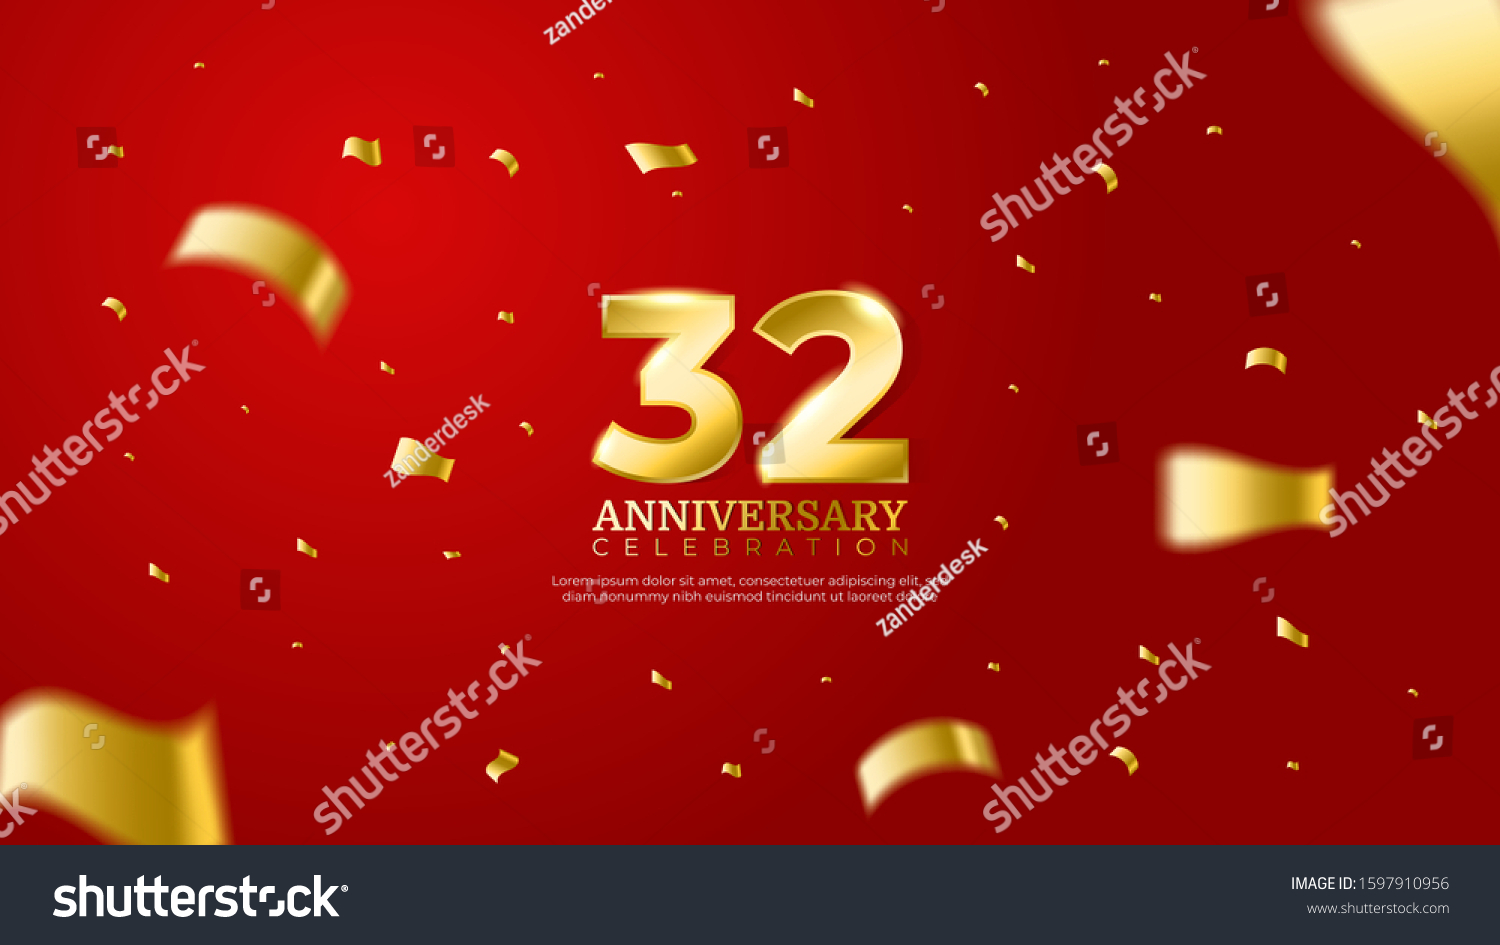 32nd Anniversary Celebration Vector Red Background Stock Vector ...